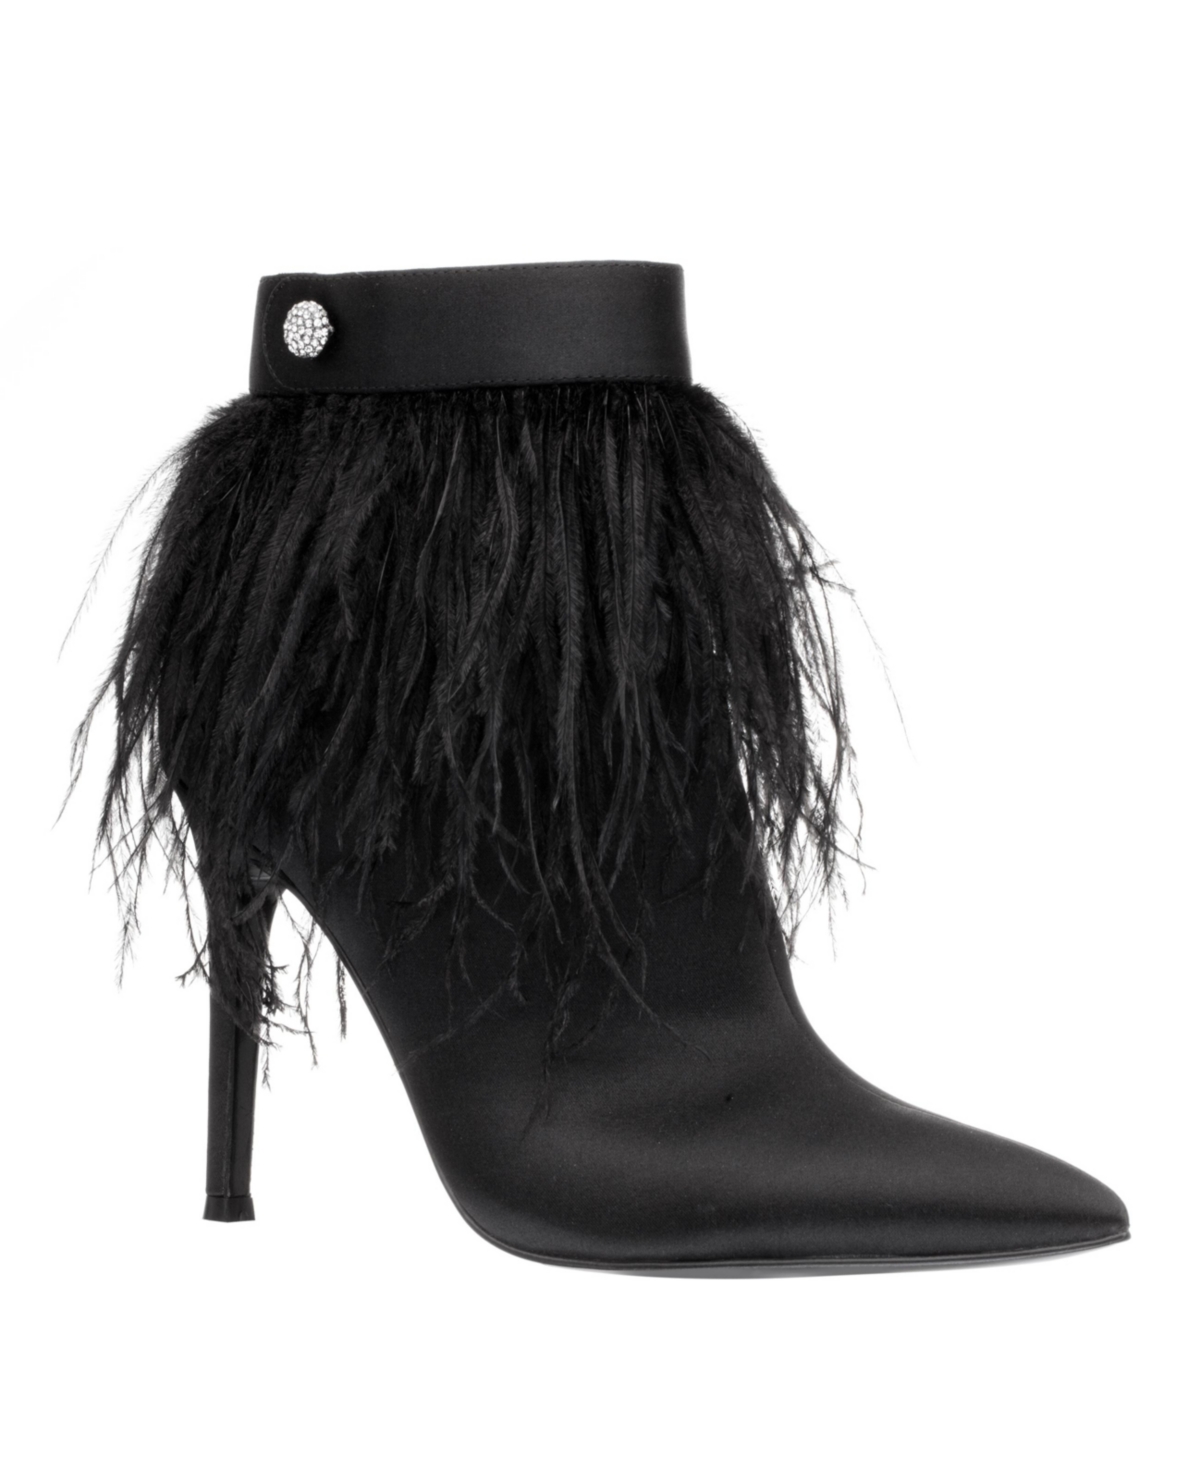 UPC 194550102939 product image for Nina Dancy Feather Stiletto Ankle Bootie Women's Shoes | upcitemdb.com